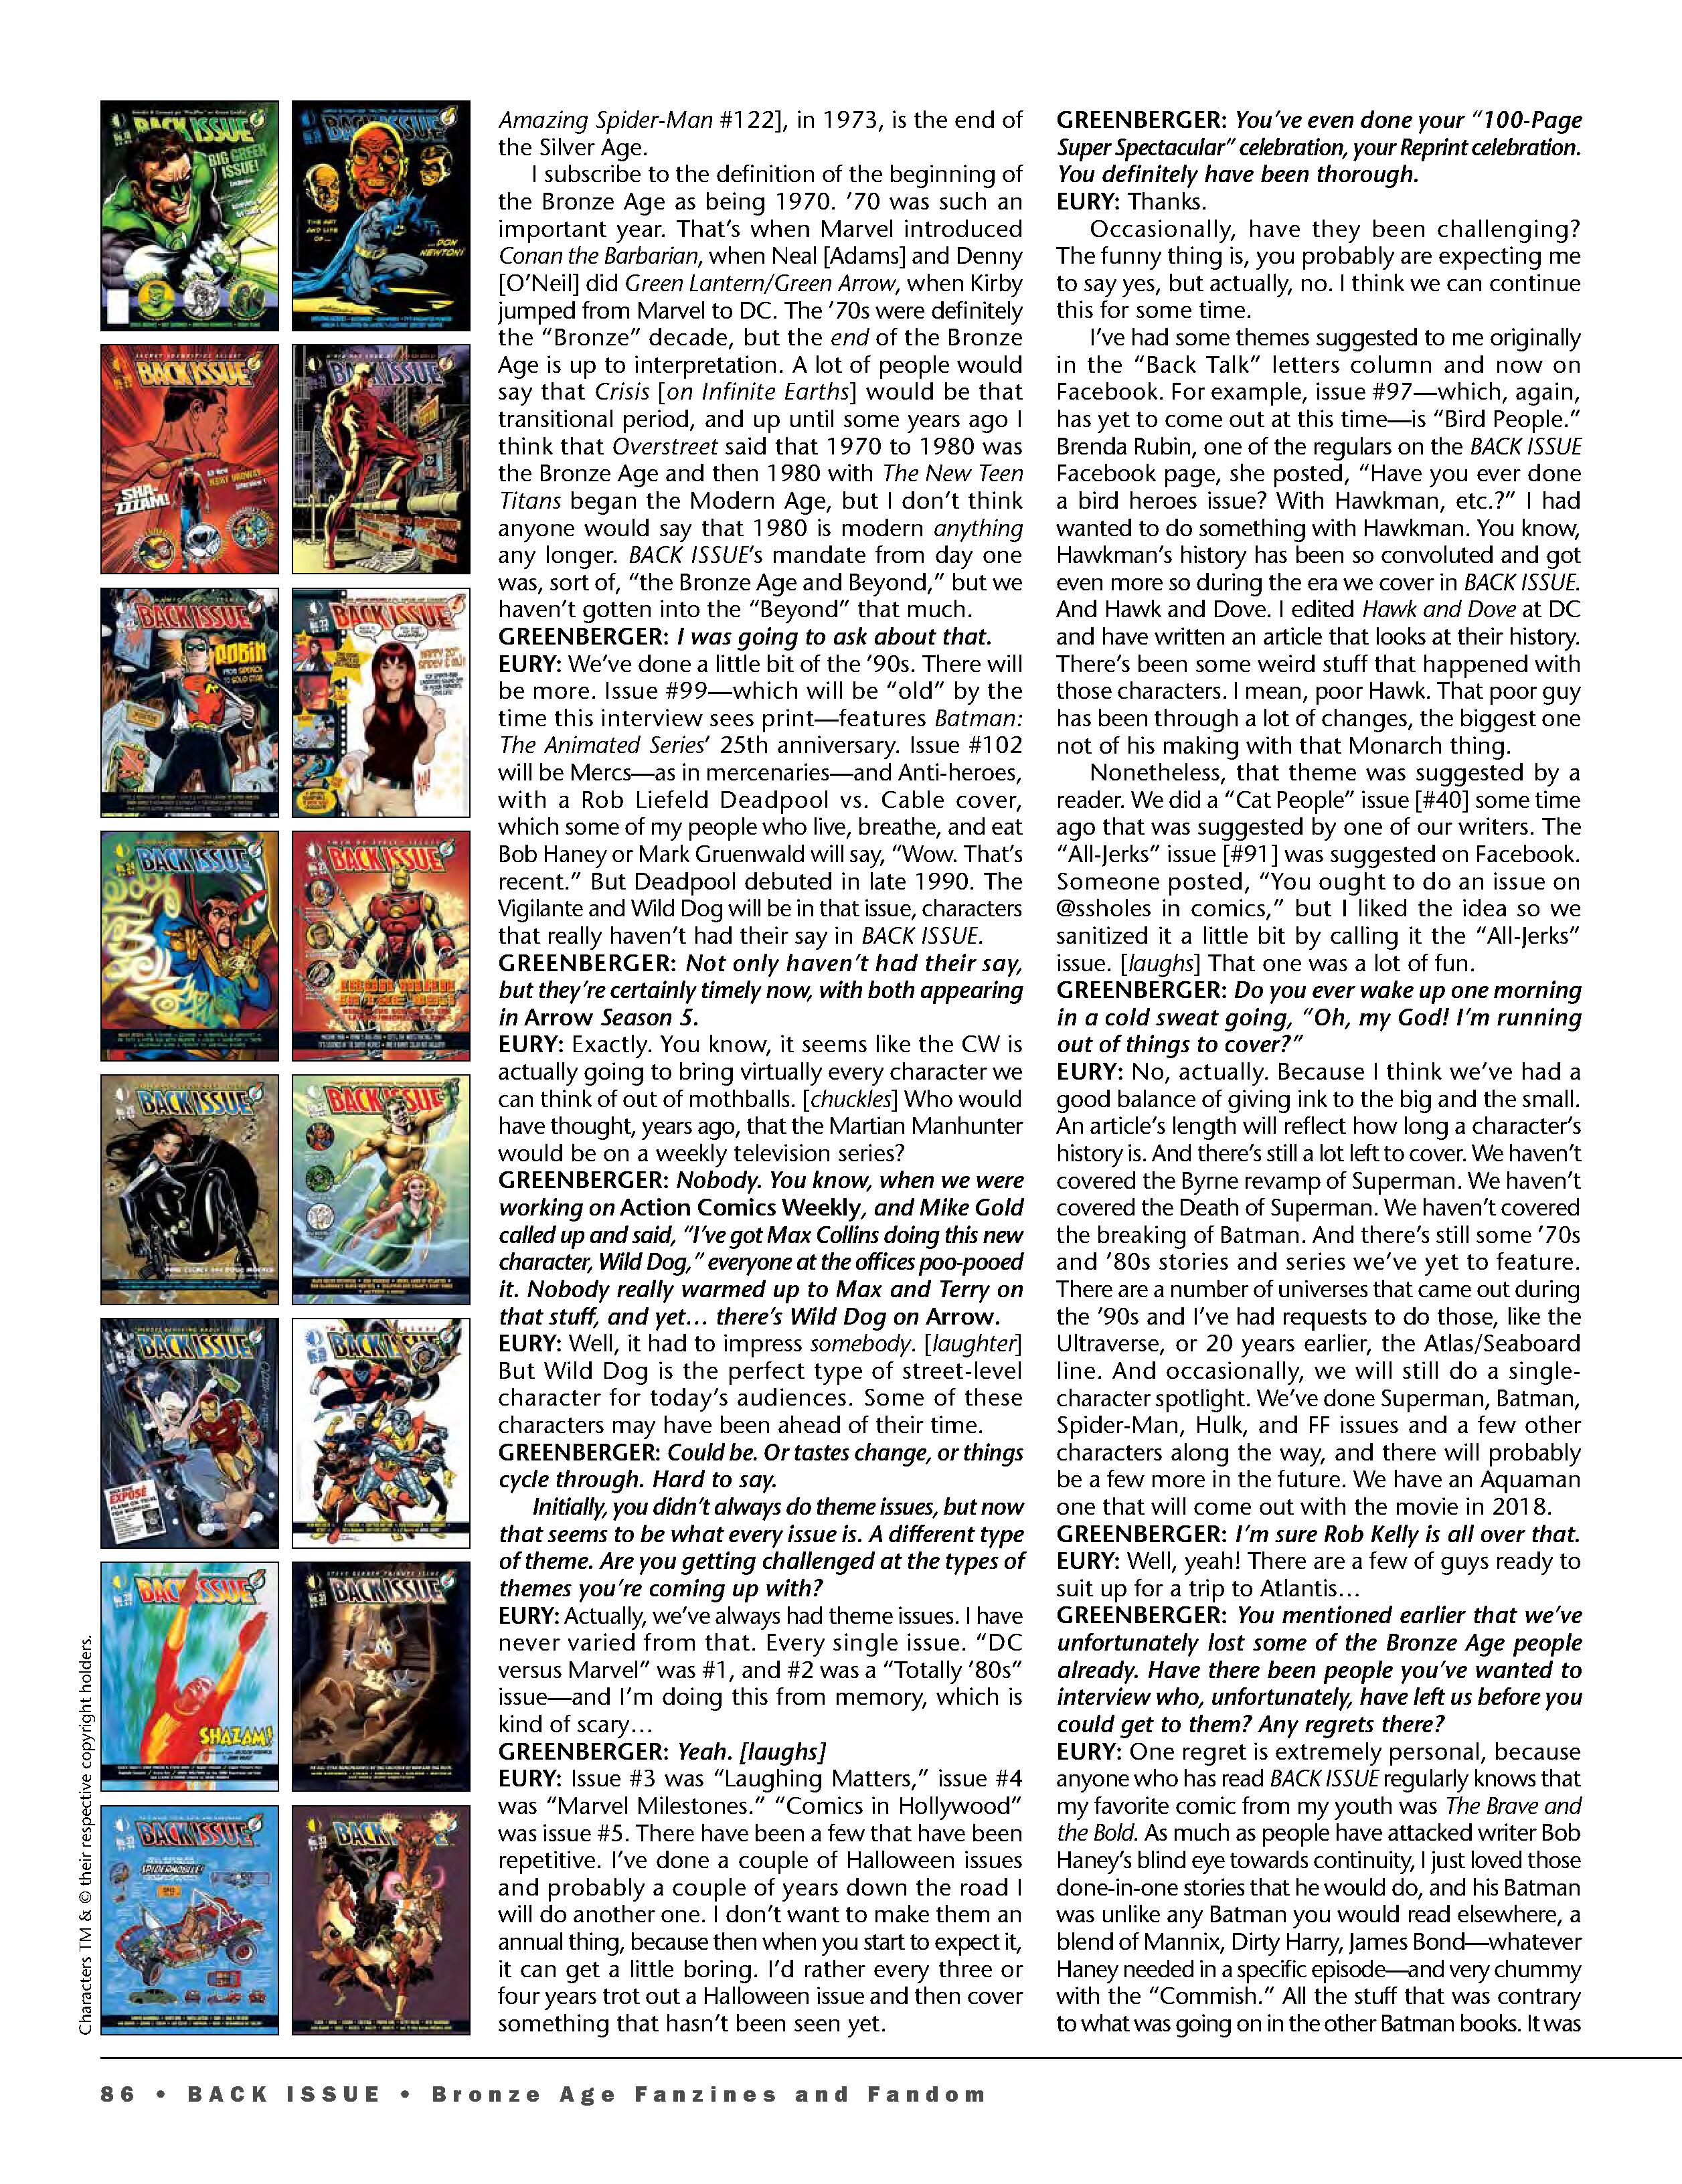 Read online Back Issue comic -  Issue #100 - 88